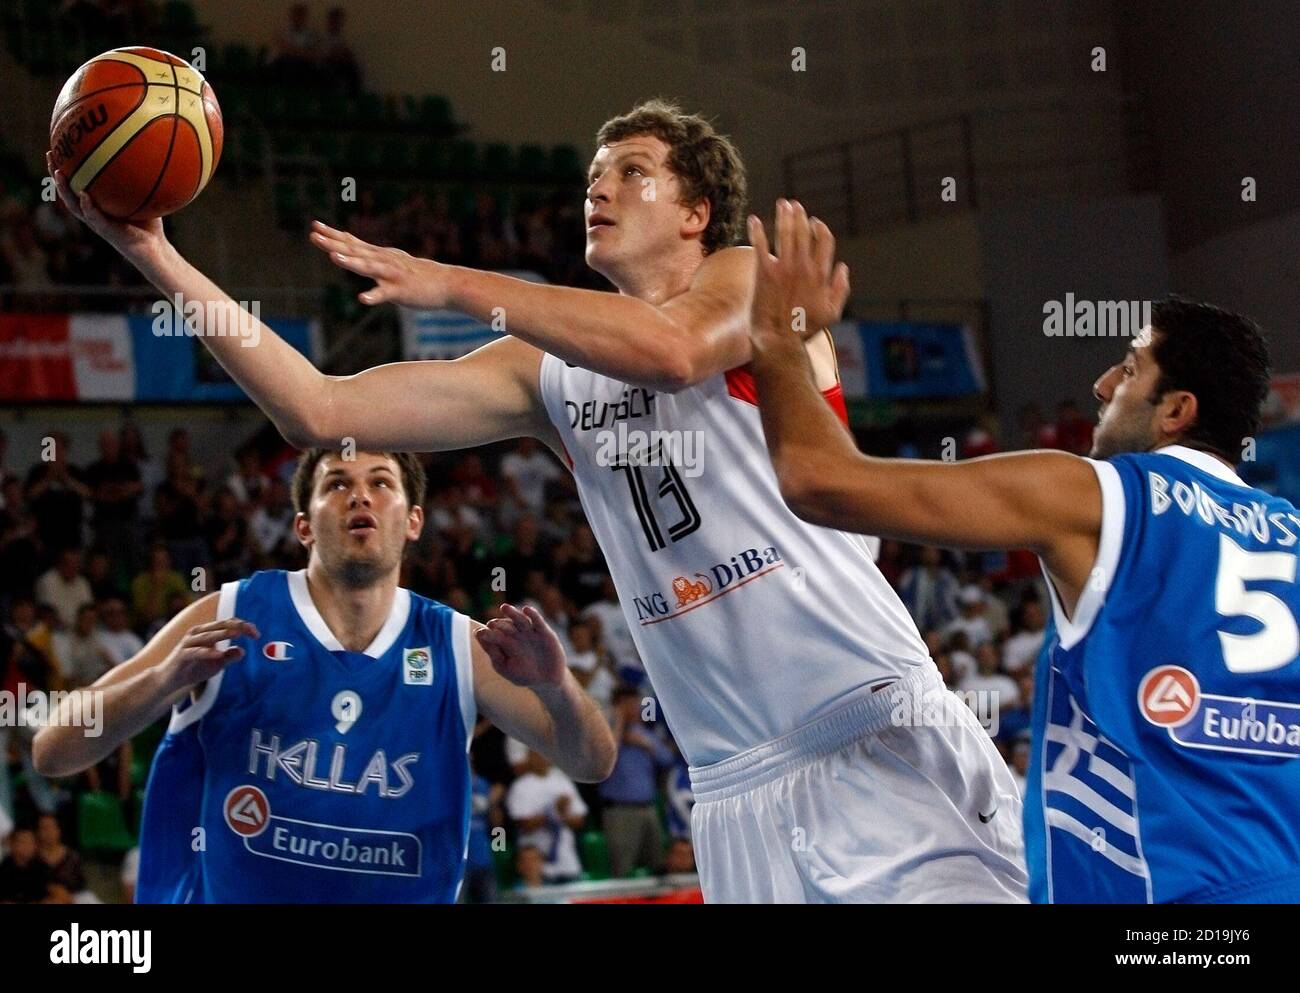 Patrick Femerling of Germany (C) goes for a basket against Ioannis Bourousis  (R) and Antonios Fotsis of Greece during their FIBA EuroBasket 2009  Qualifying Round Group E basketball game in Bydgoszcz September